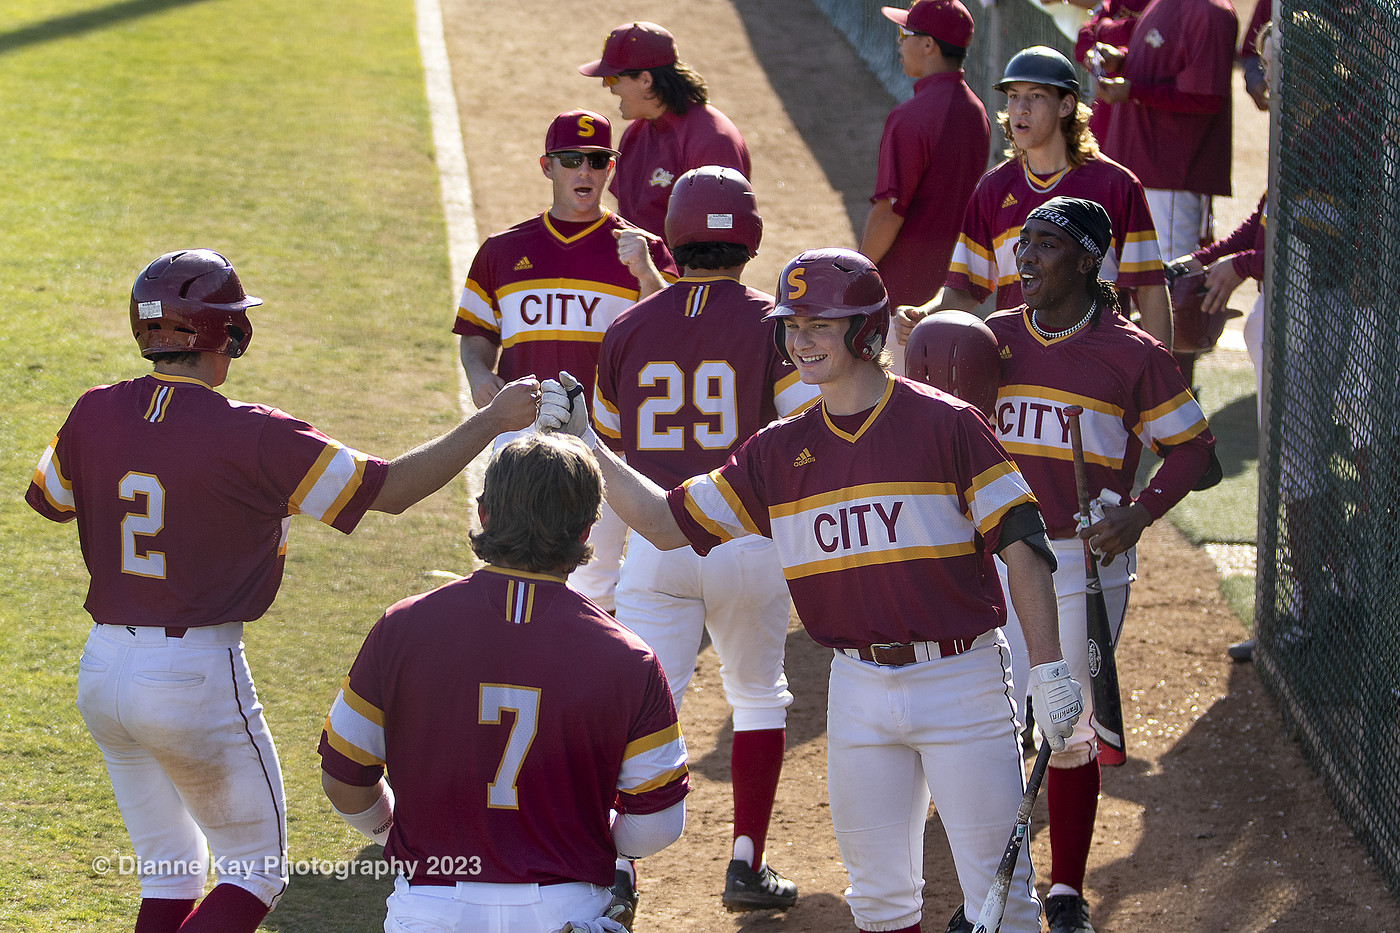 City snaps their 4-game losing streak and avoids the 3-game sweep with a 7-2 win over Fullerton